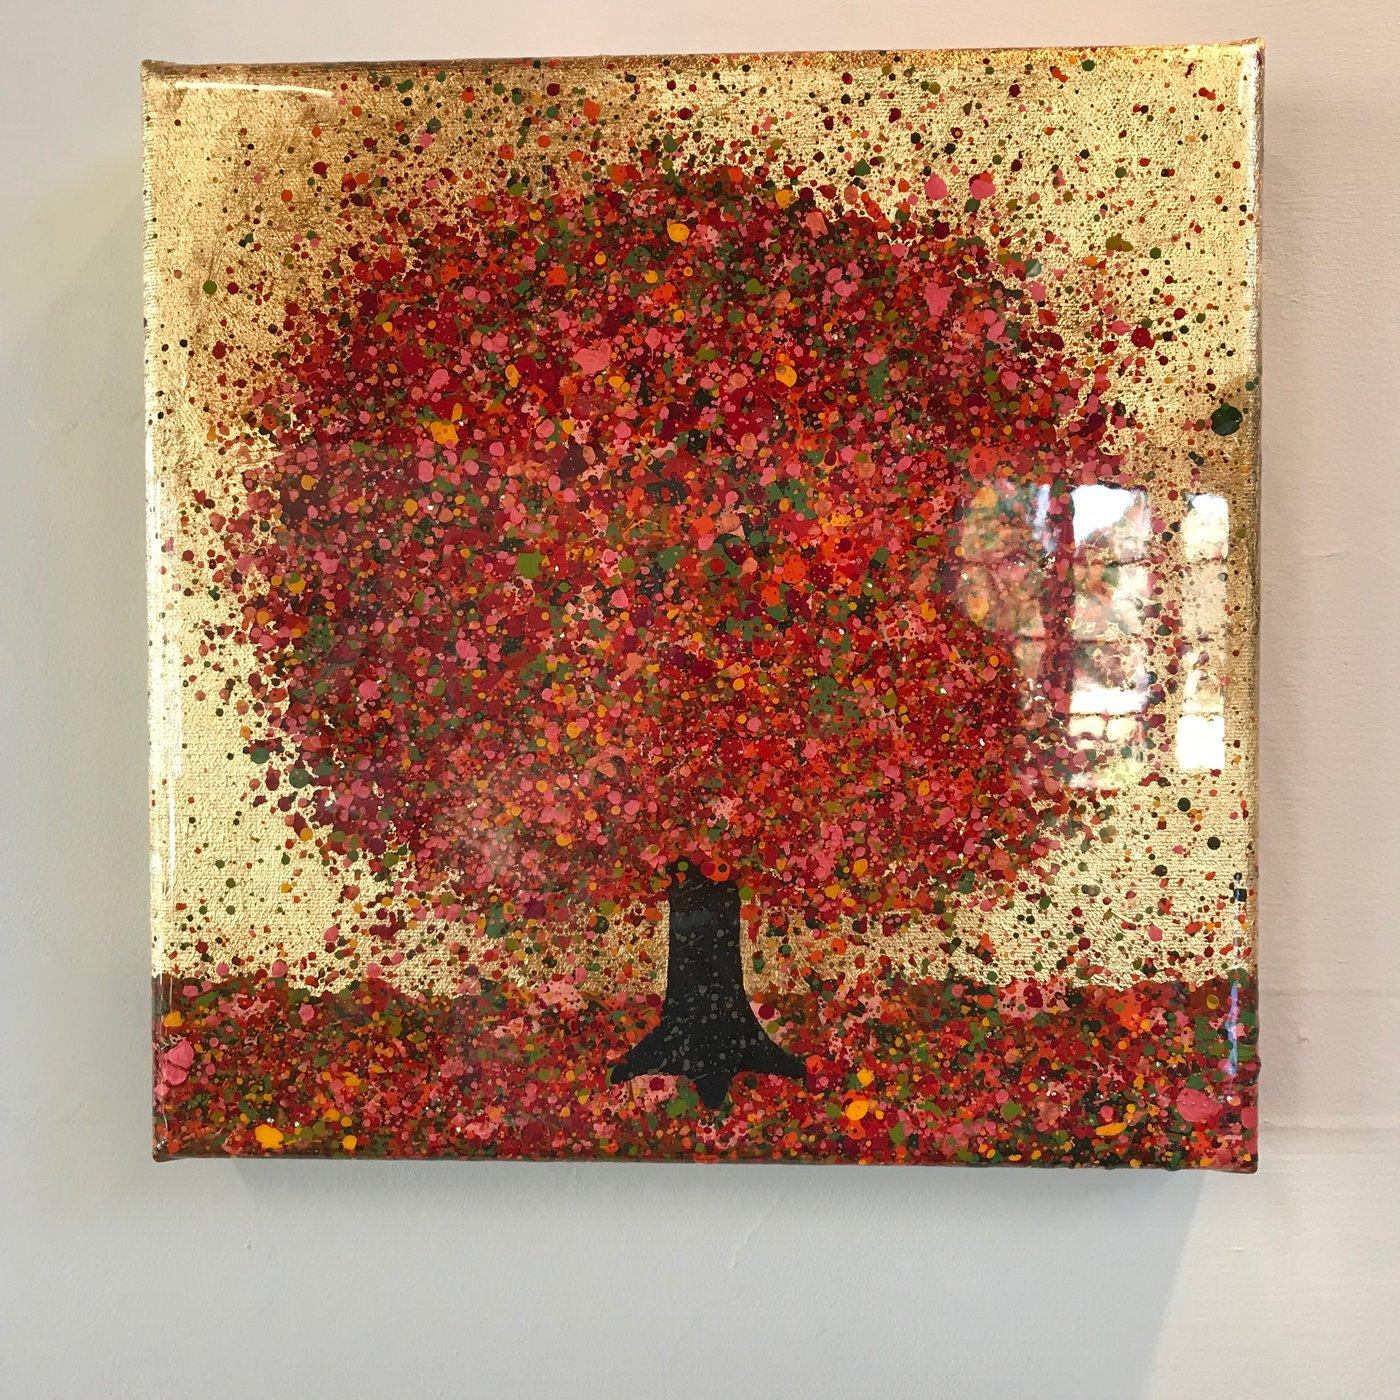 Warm Autumn Evening- Nicky Chubb, mixed media on canvas, lansdcape, abstacted  1